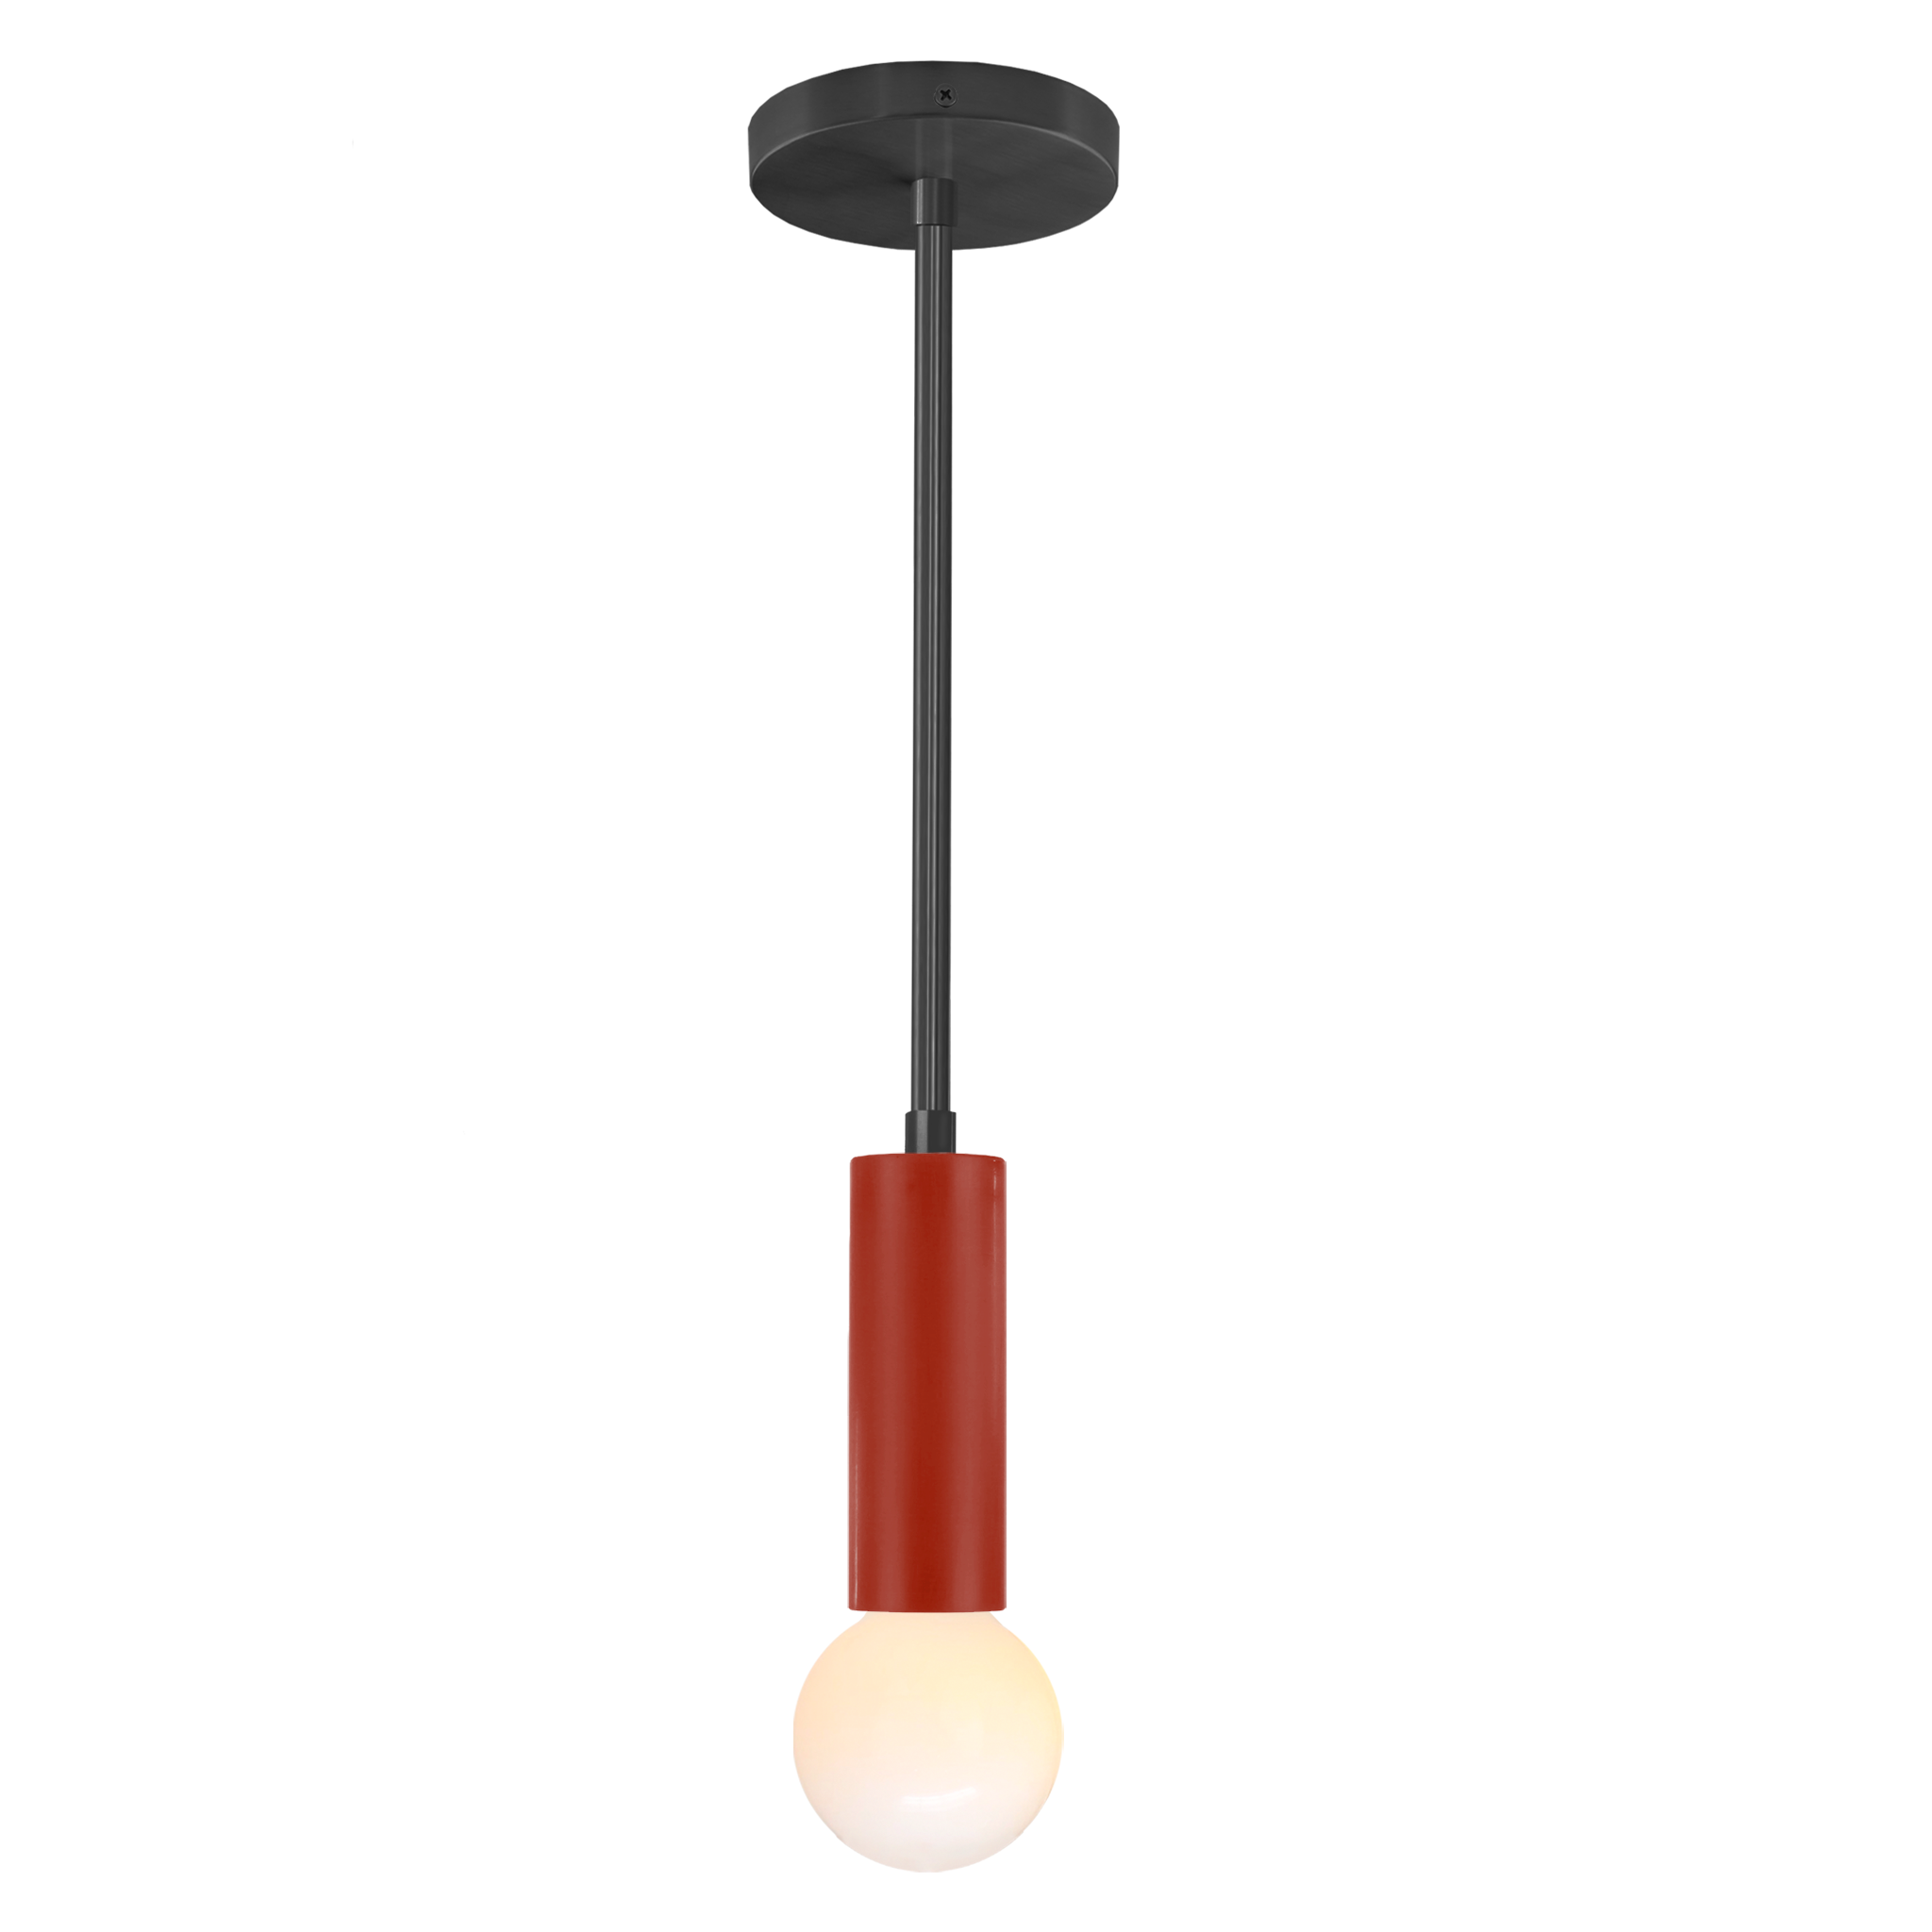 Black and riding hood red color Eureka pendant Dutton Brown lighting